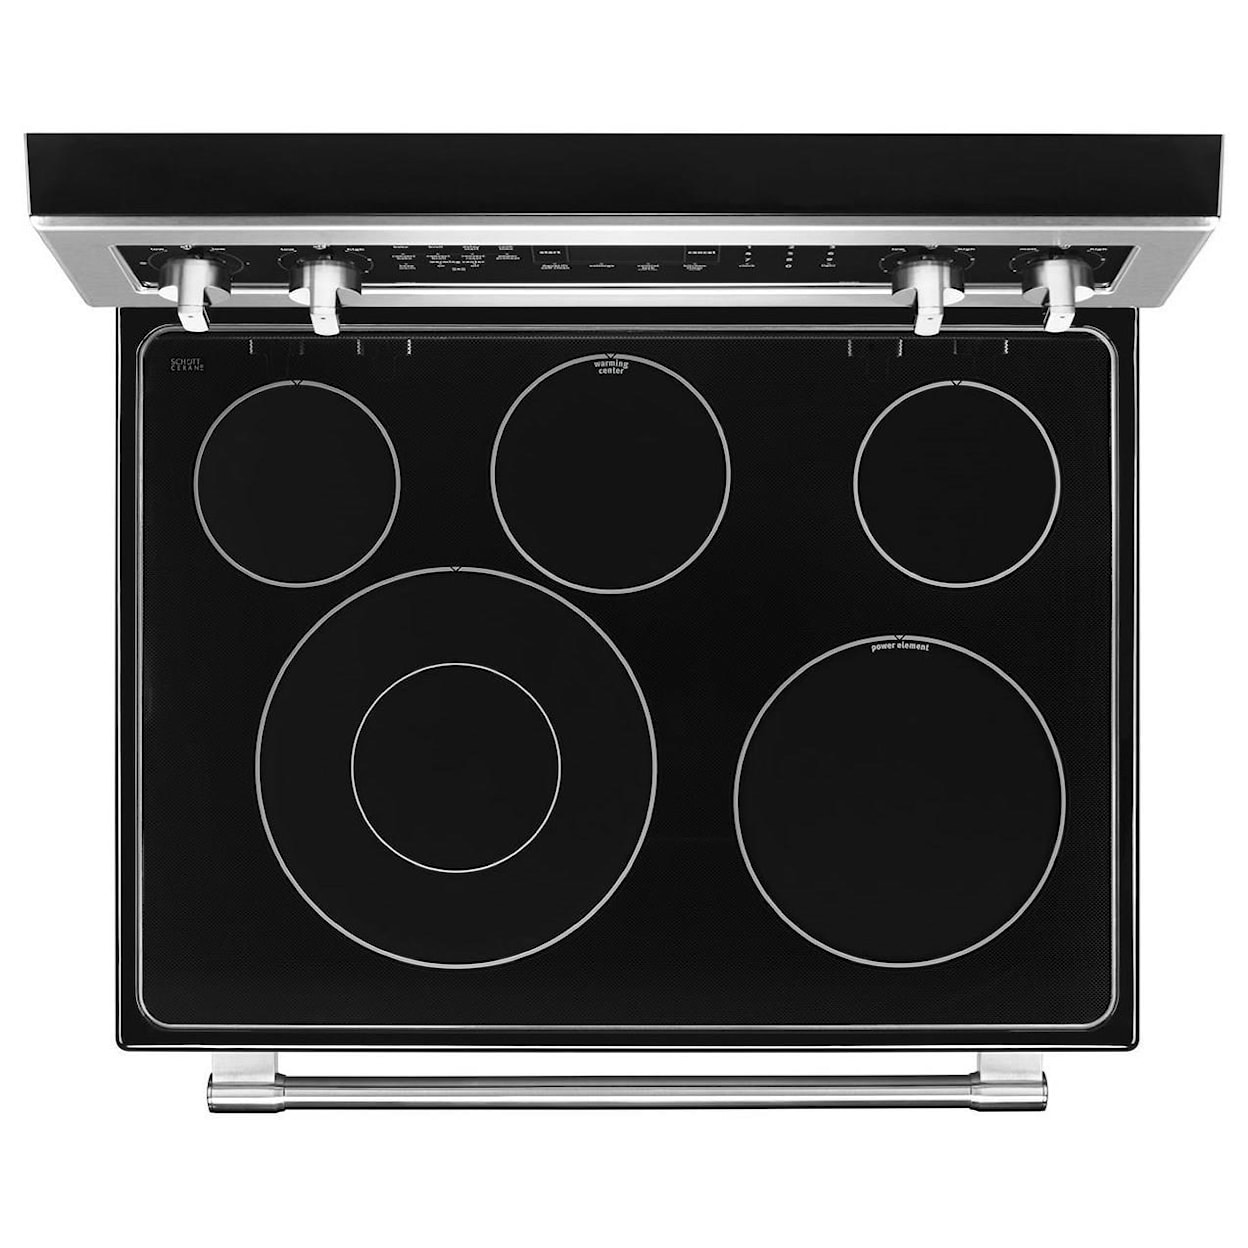 Maytag Electric Ranges 30-Inch Wide Electric Range 